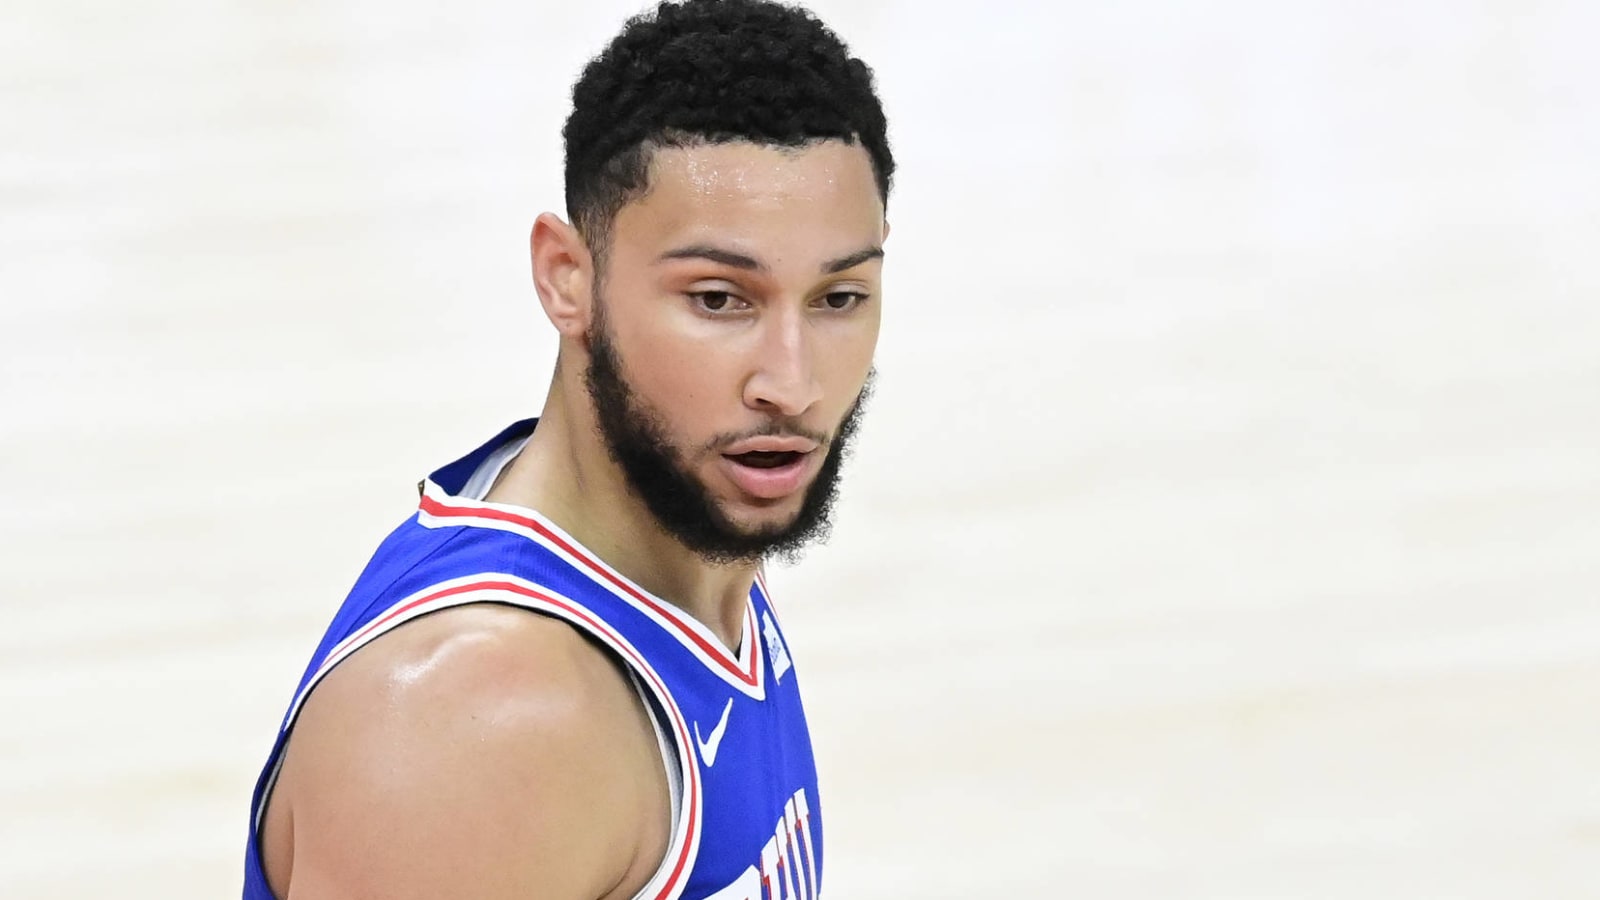 Philly fans have profane Ben Simmons chant during AEW event